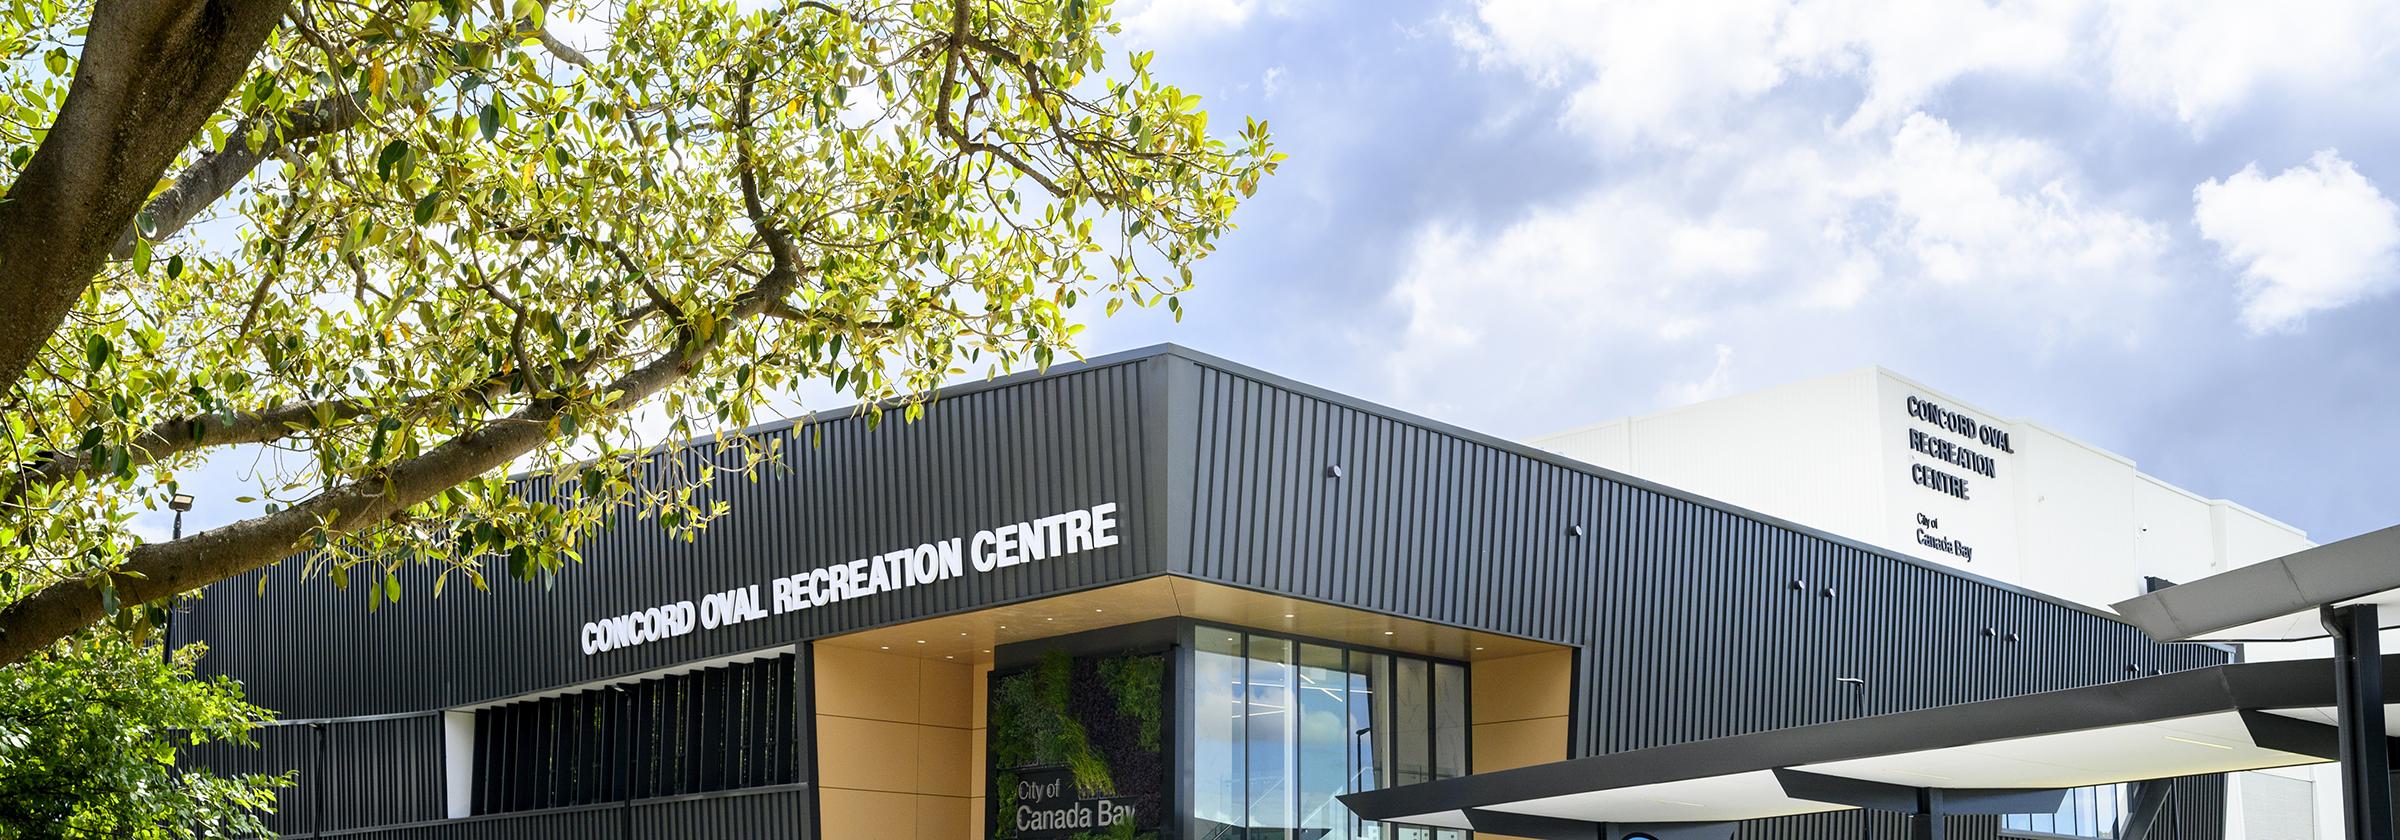 Building with text that says Concord Oval Recreation Centre with trees in foreground